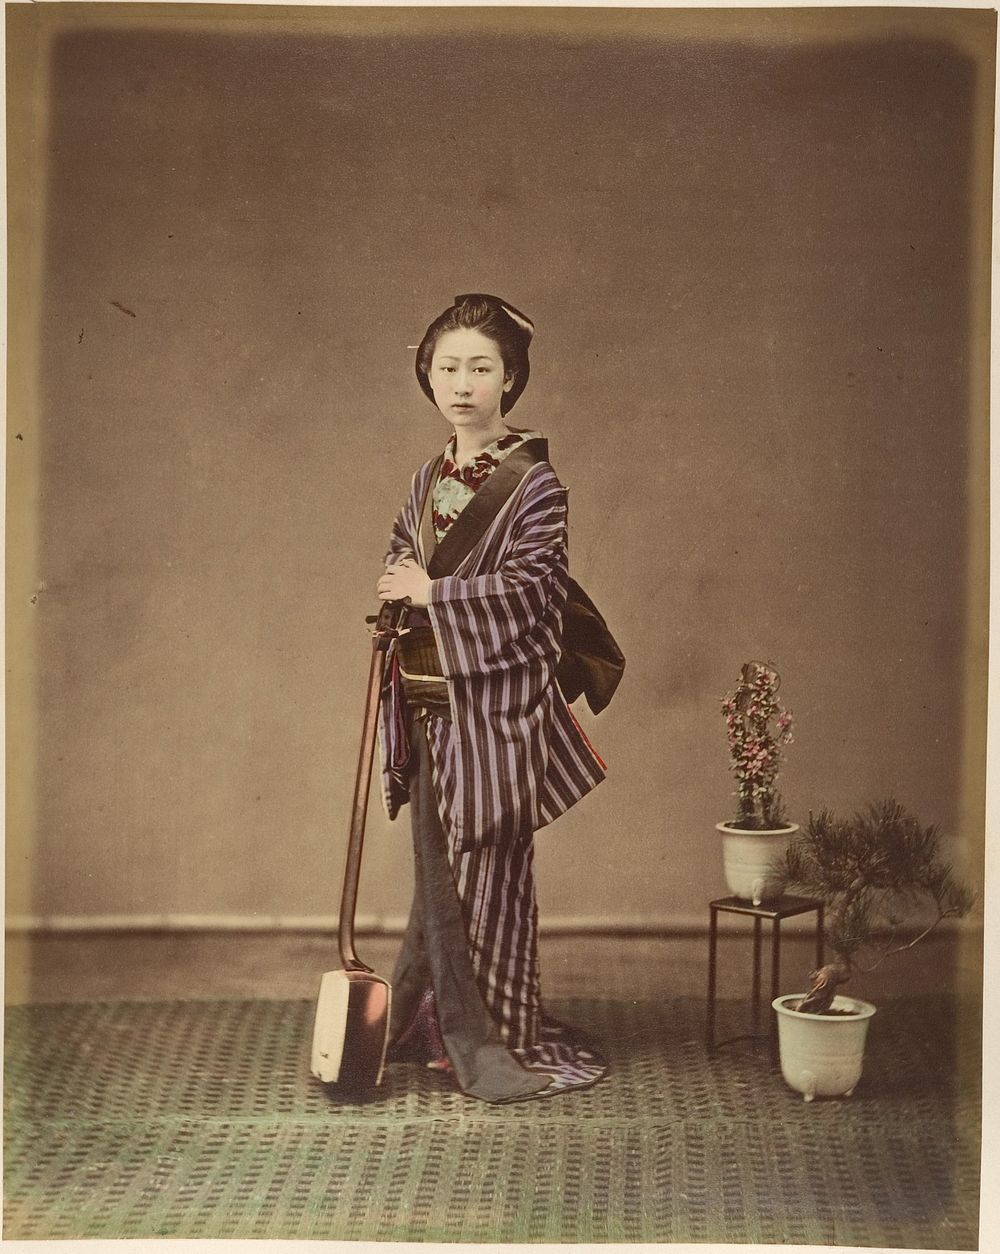 [Japanese Woman in Traditional Dress Posing with Instrument]